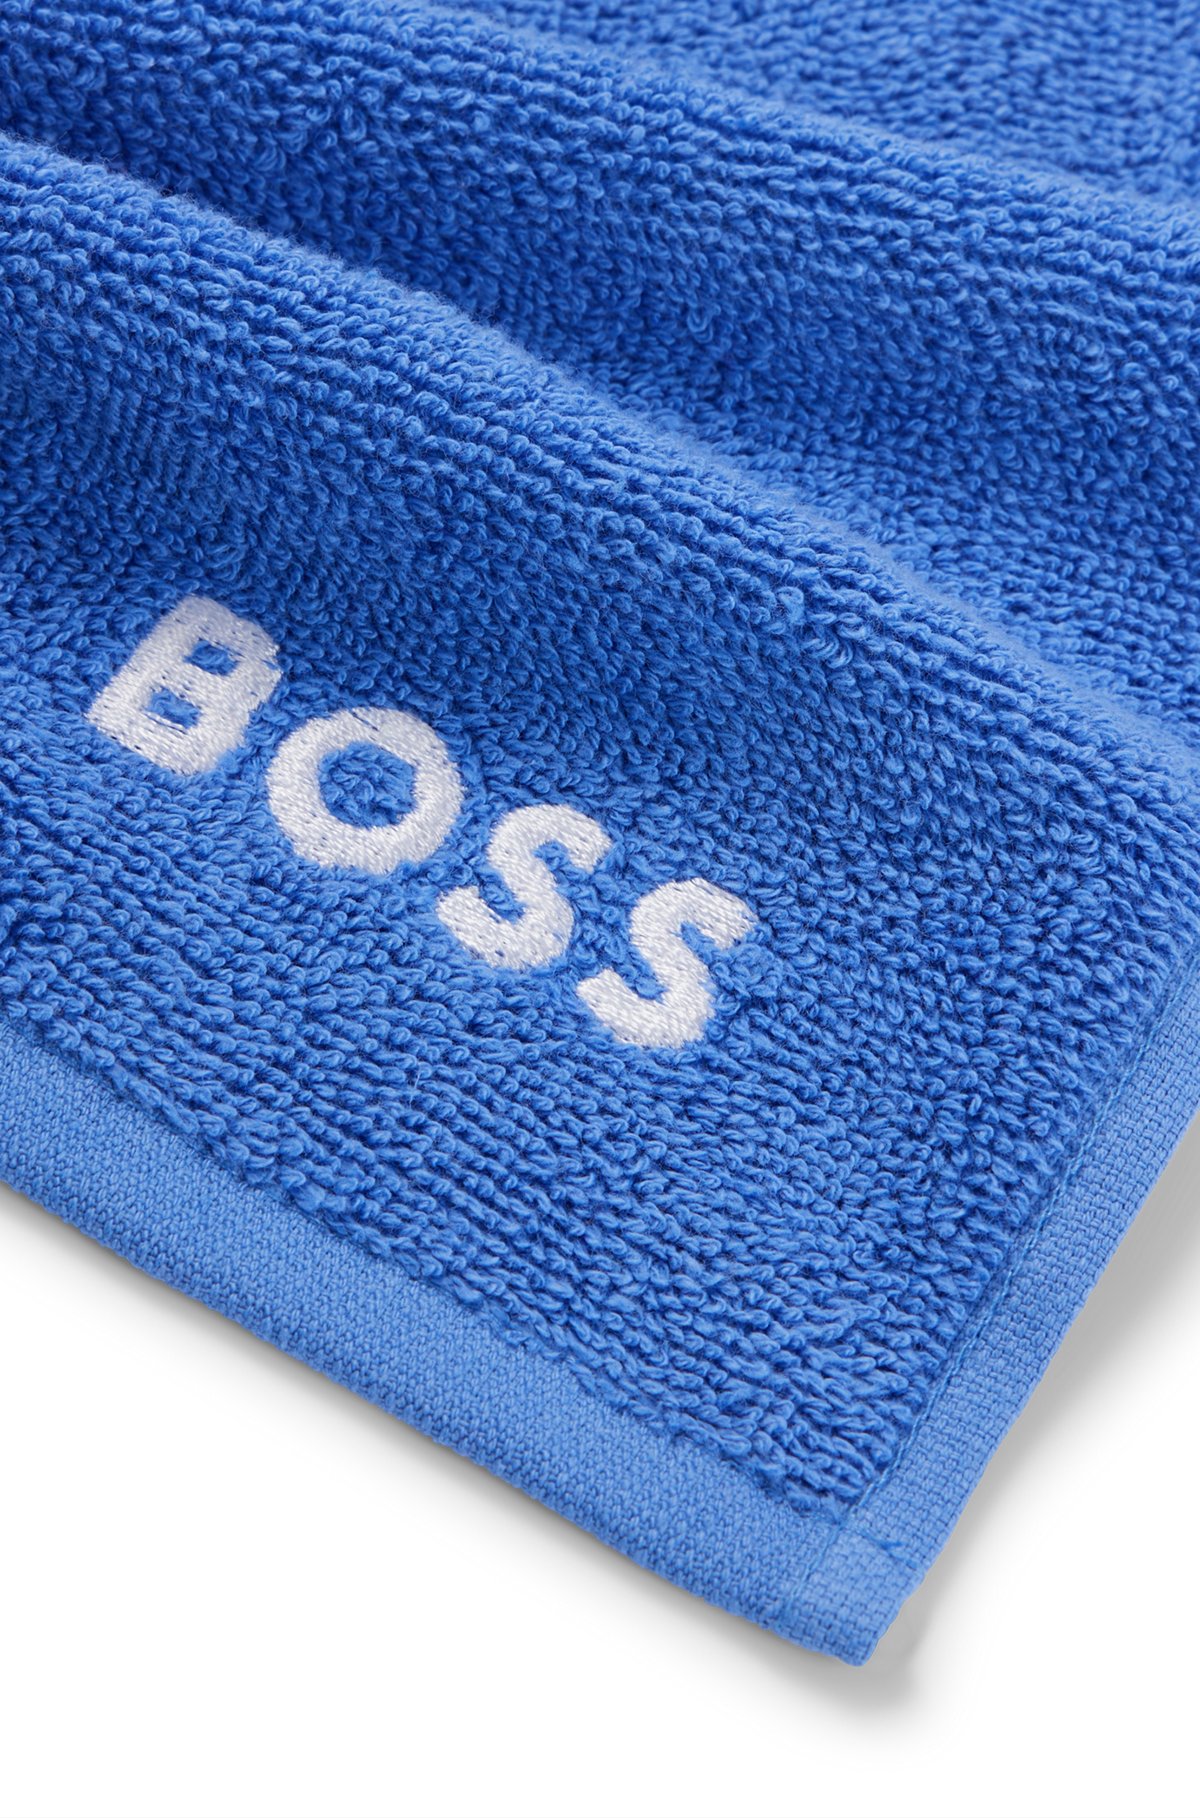 Cotton face cloth with white logo embroidery, Blue